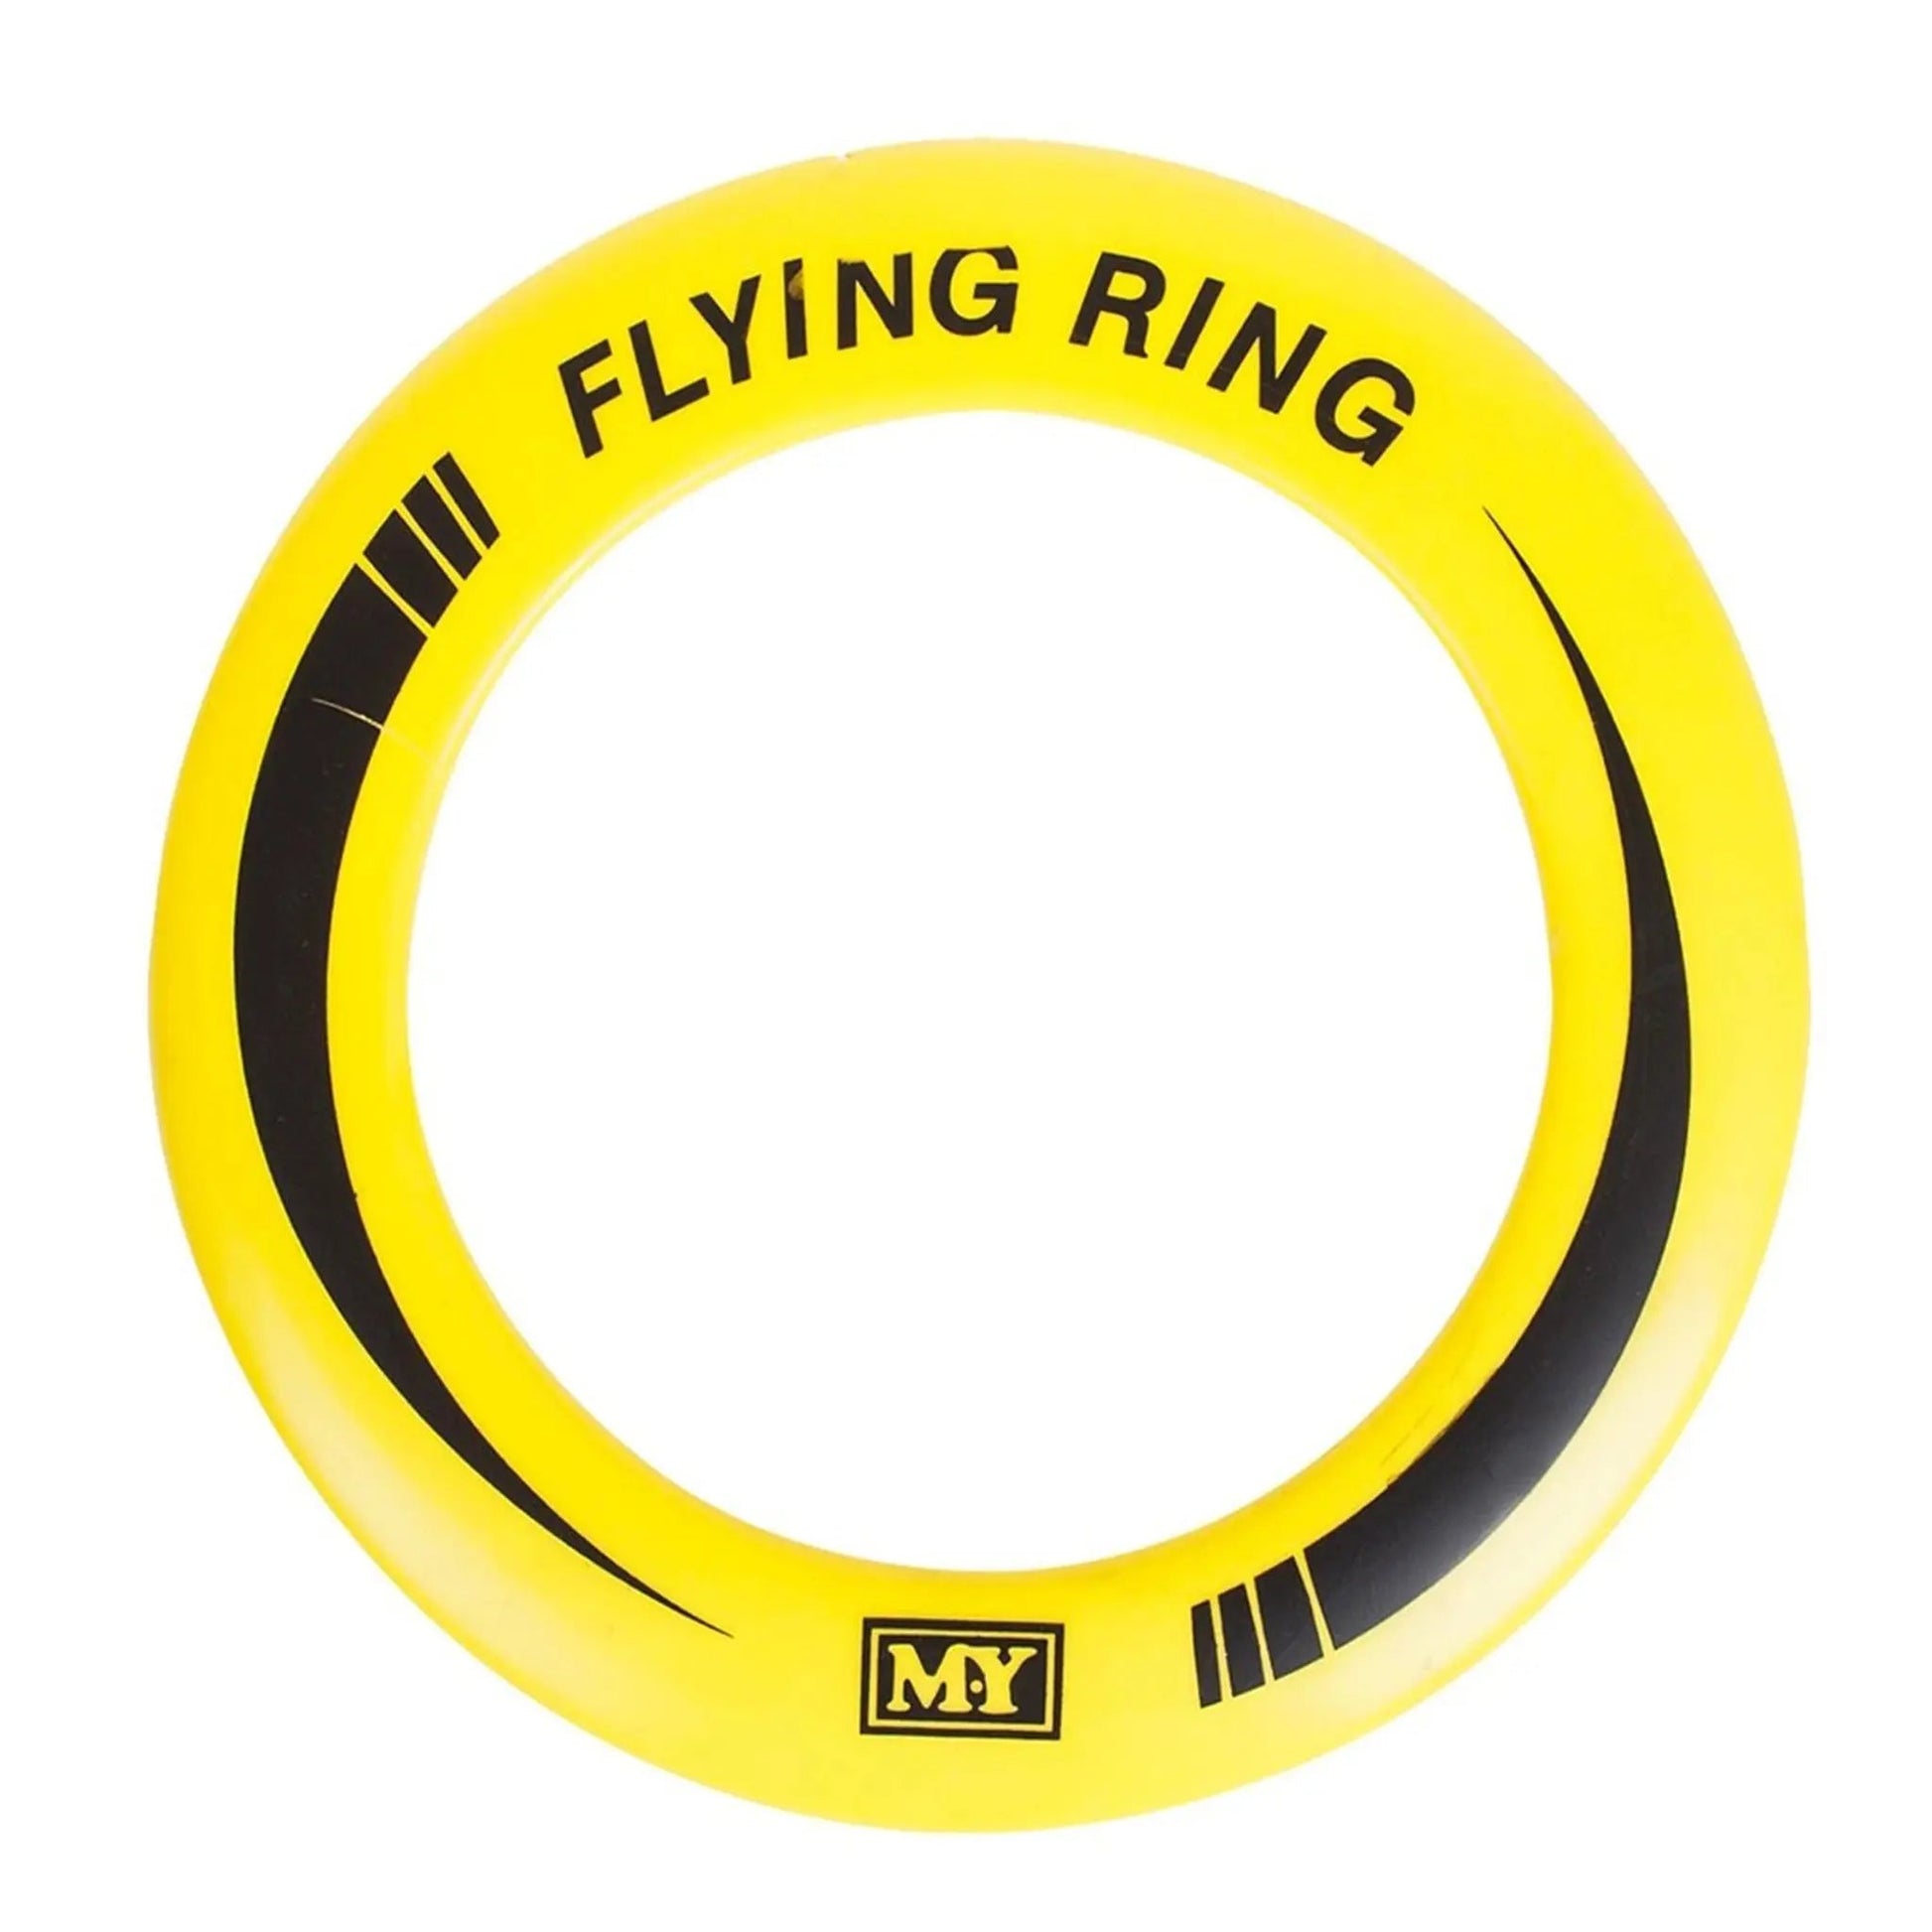 Flying Rings - Muddleit - The Forgotten Toy Shop